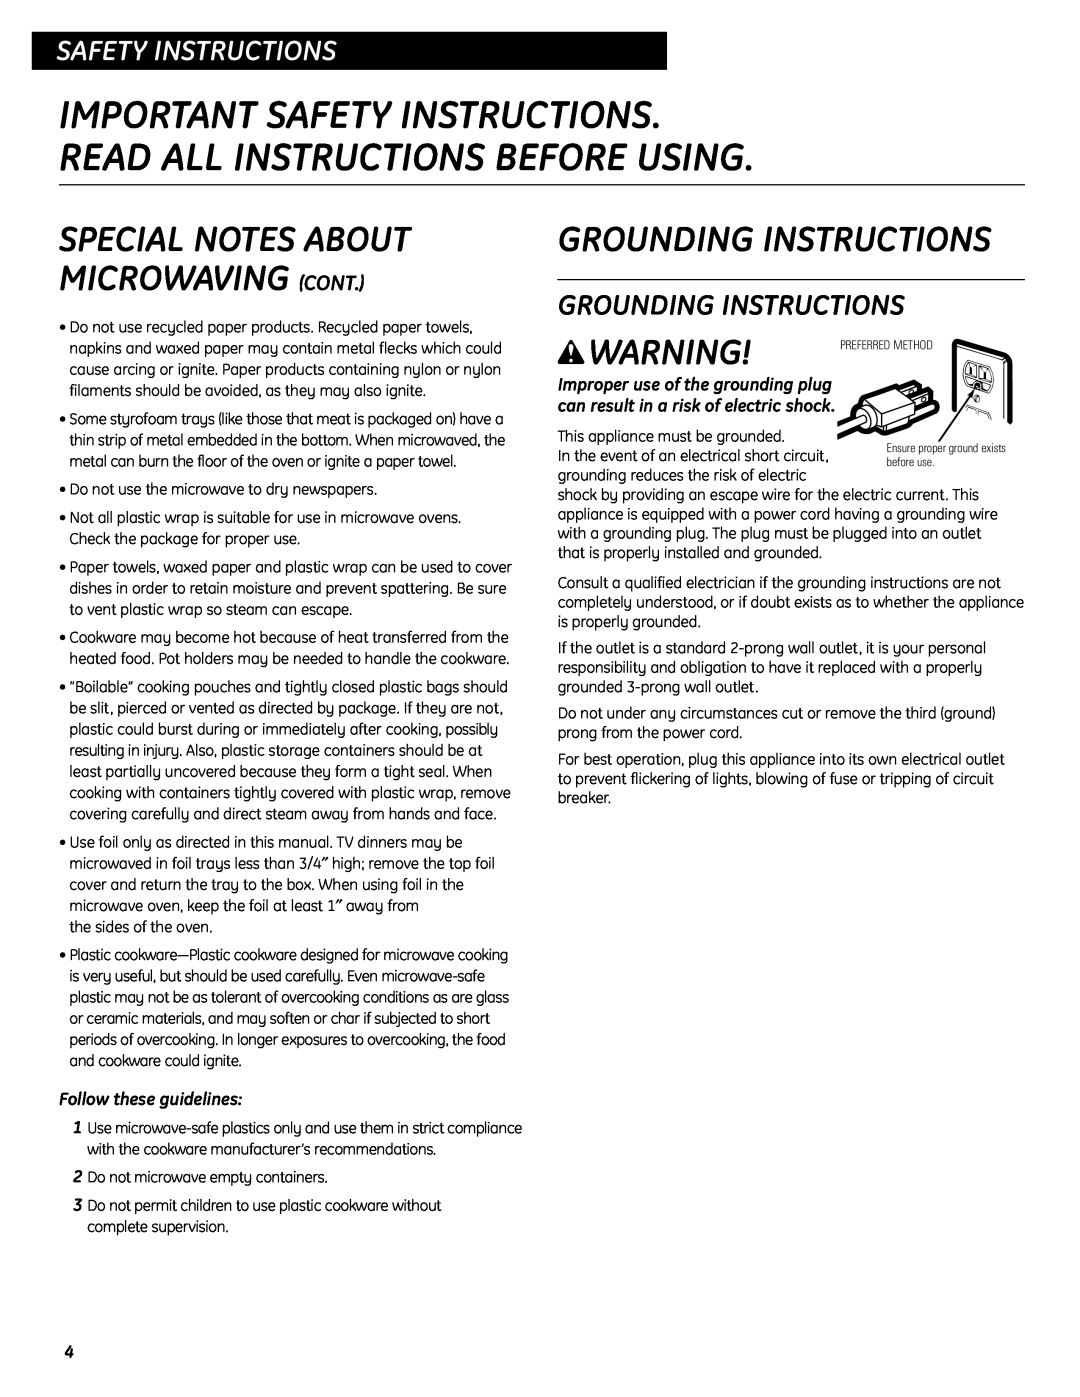 GE WES0930 operating instructions Grounding Instructions, Important Safety Instructions. Read All Instructions Before Using 